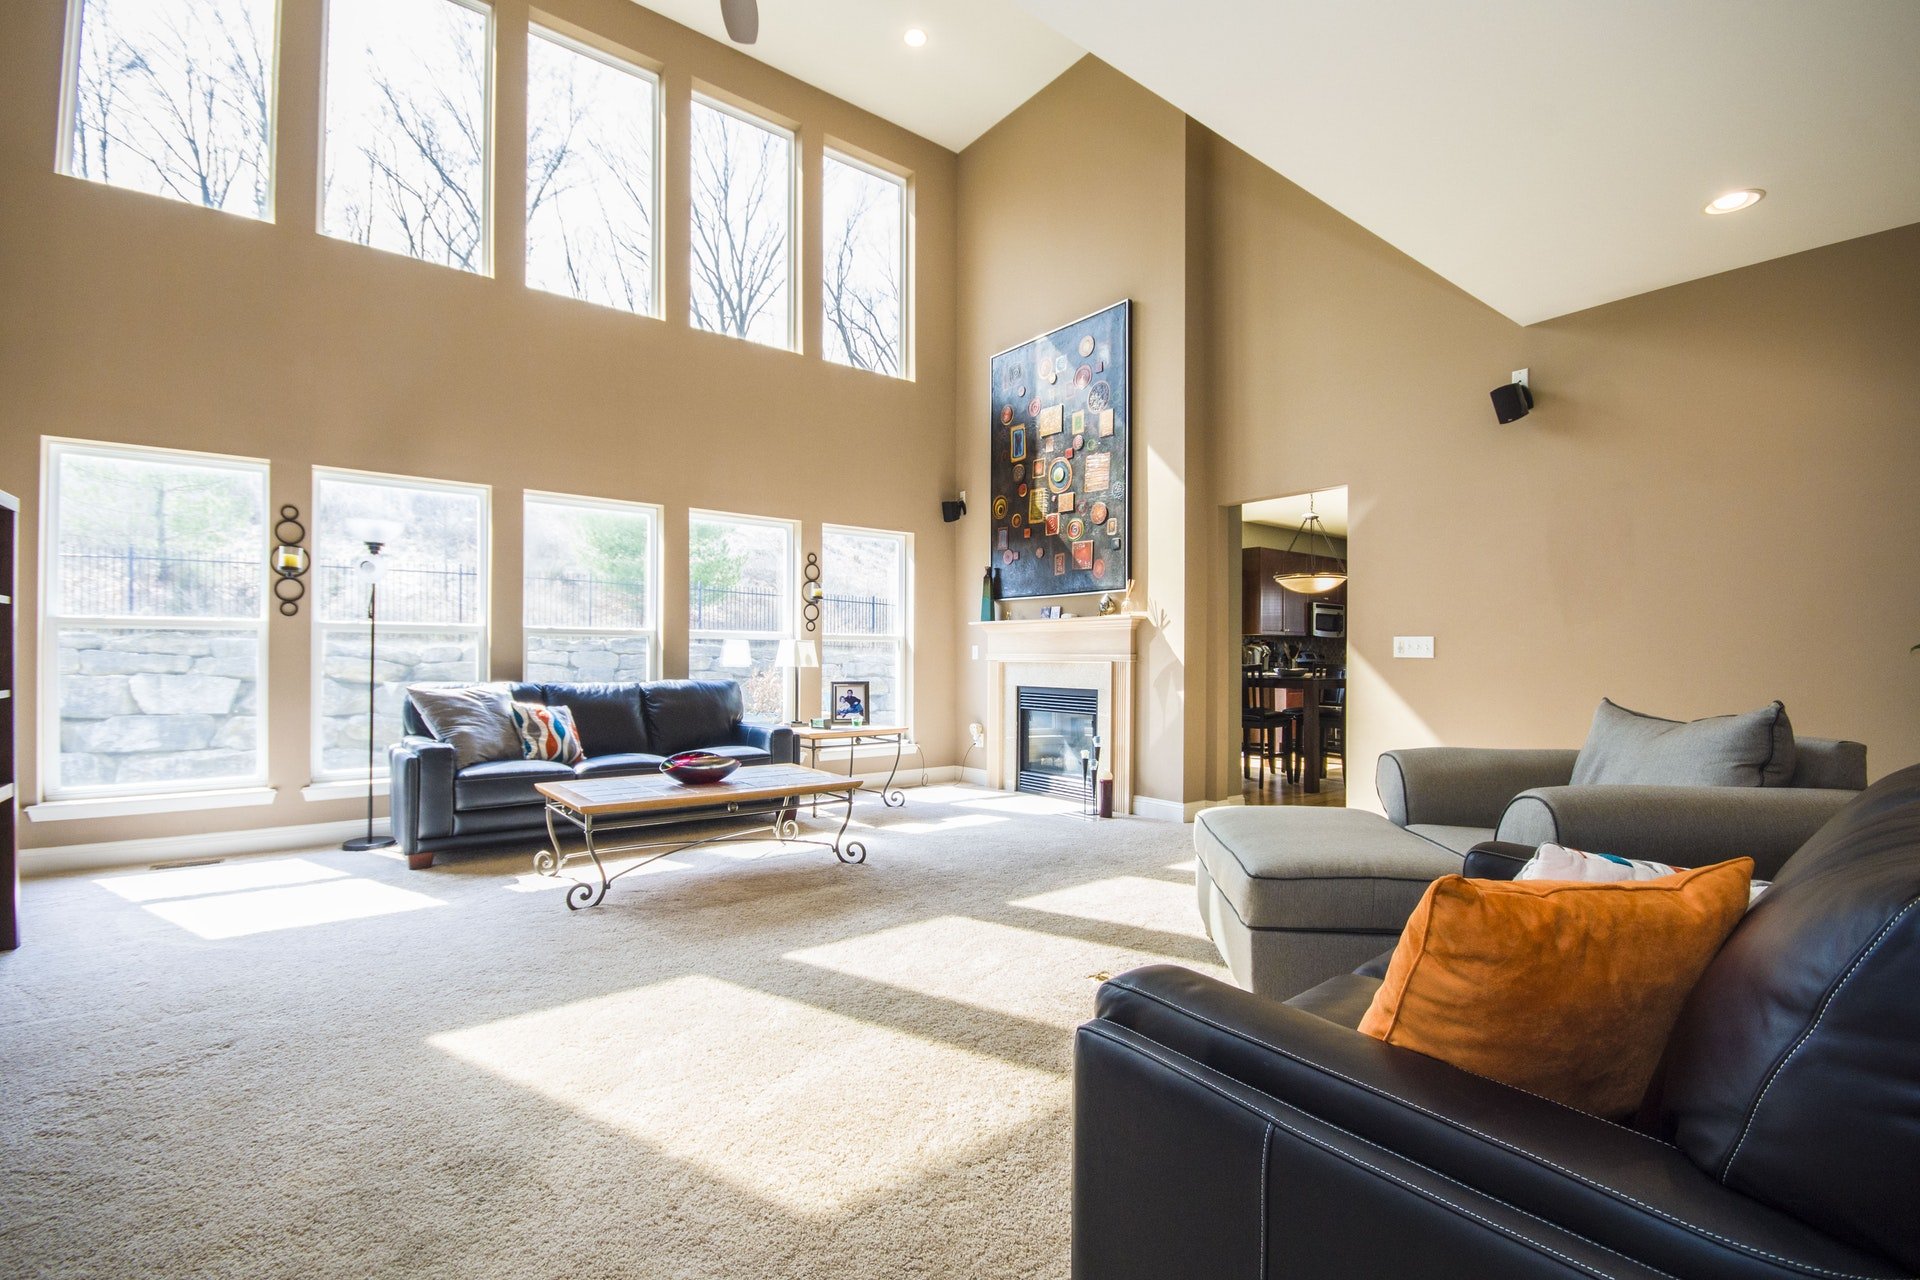 A living room with huge windows flooding the room with natural light